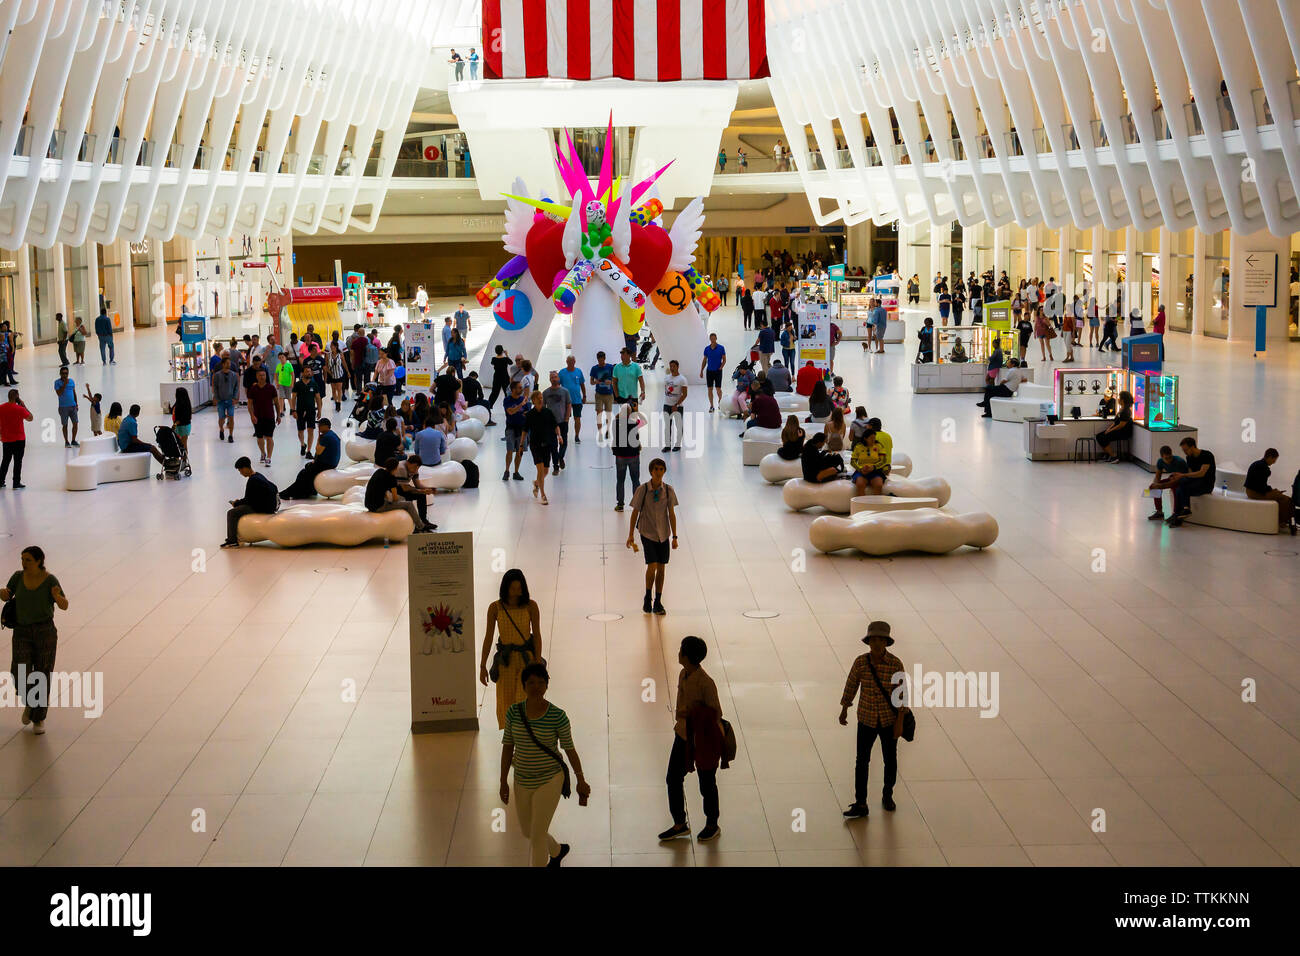 In celebration of Stonewall 50 visitors interact with the inflatable “Live 4 Love” sculpture in the Oculus of the World Trade Center Transportation Hub in New York on Saturday, Jun 15, 2019. The 20 foot-tall sculpture is decorated with design symbols representing issues important to the LGBTQ community and will be displayed in the Gay Pride Stonewall 50 Parade later in the month. (© Richard B. Levine) Stock Photo